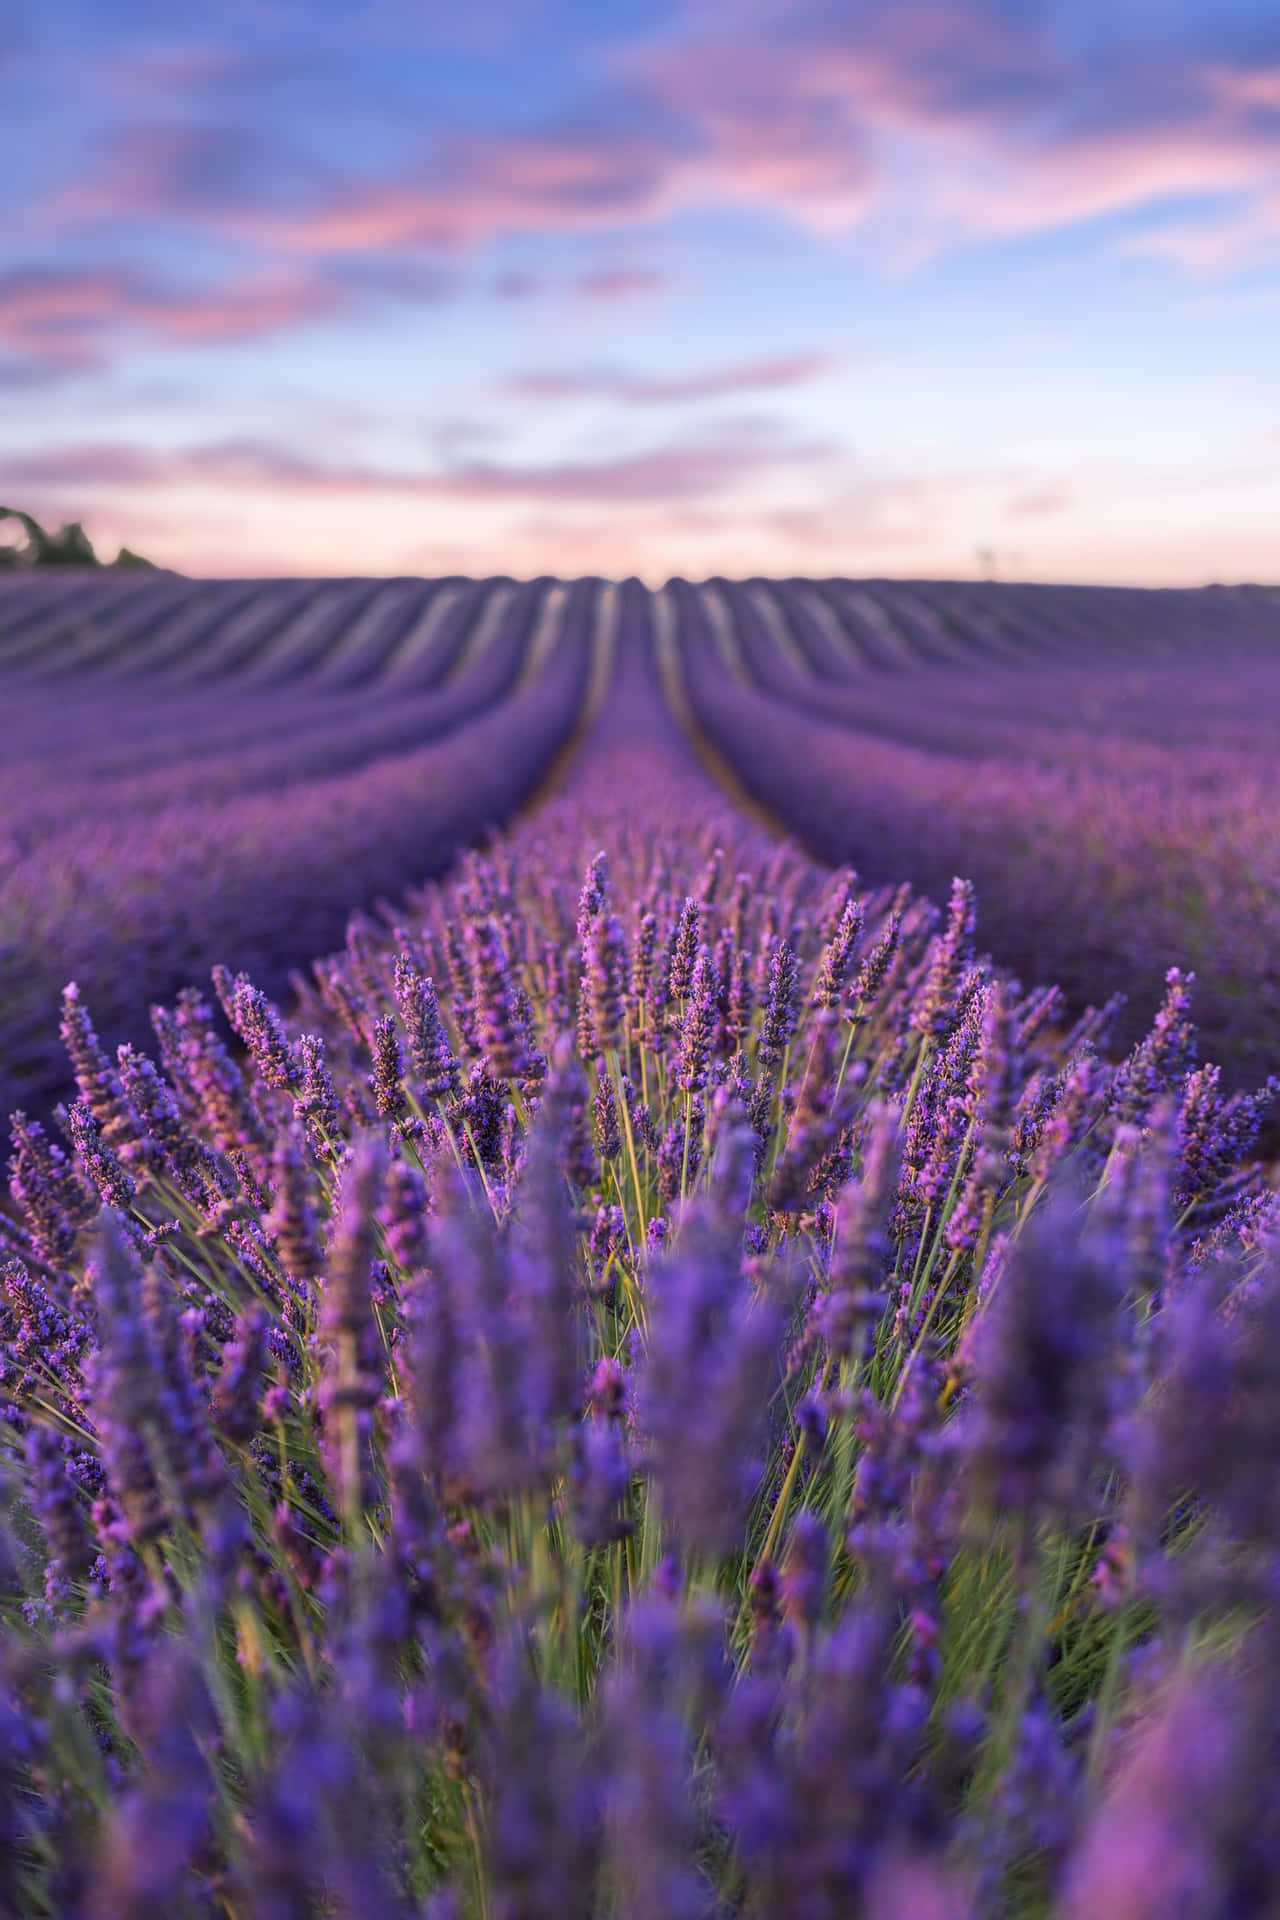 Free download the Lavender At Night wallpaper beaty your iphone  starry  field nature flower wonderfu  Nature wallpaper Lavender fields  Sunrise wallpaper